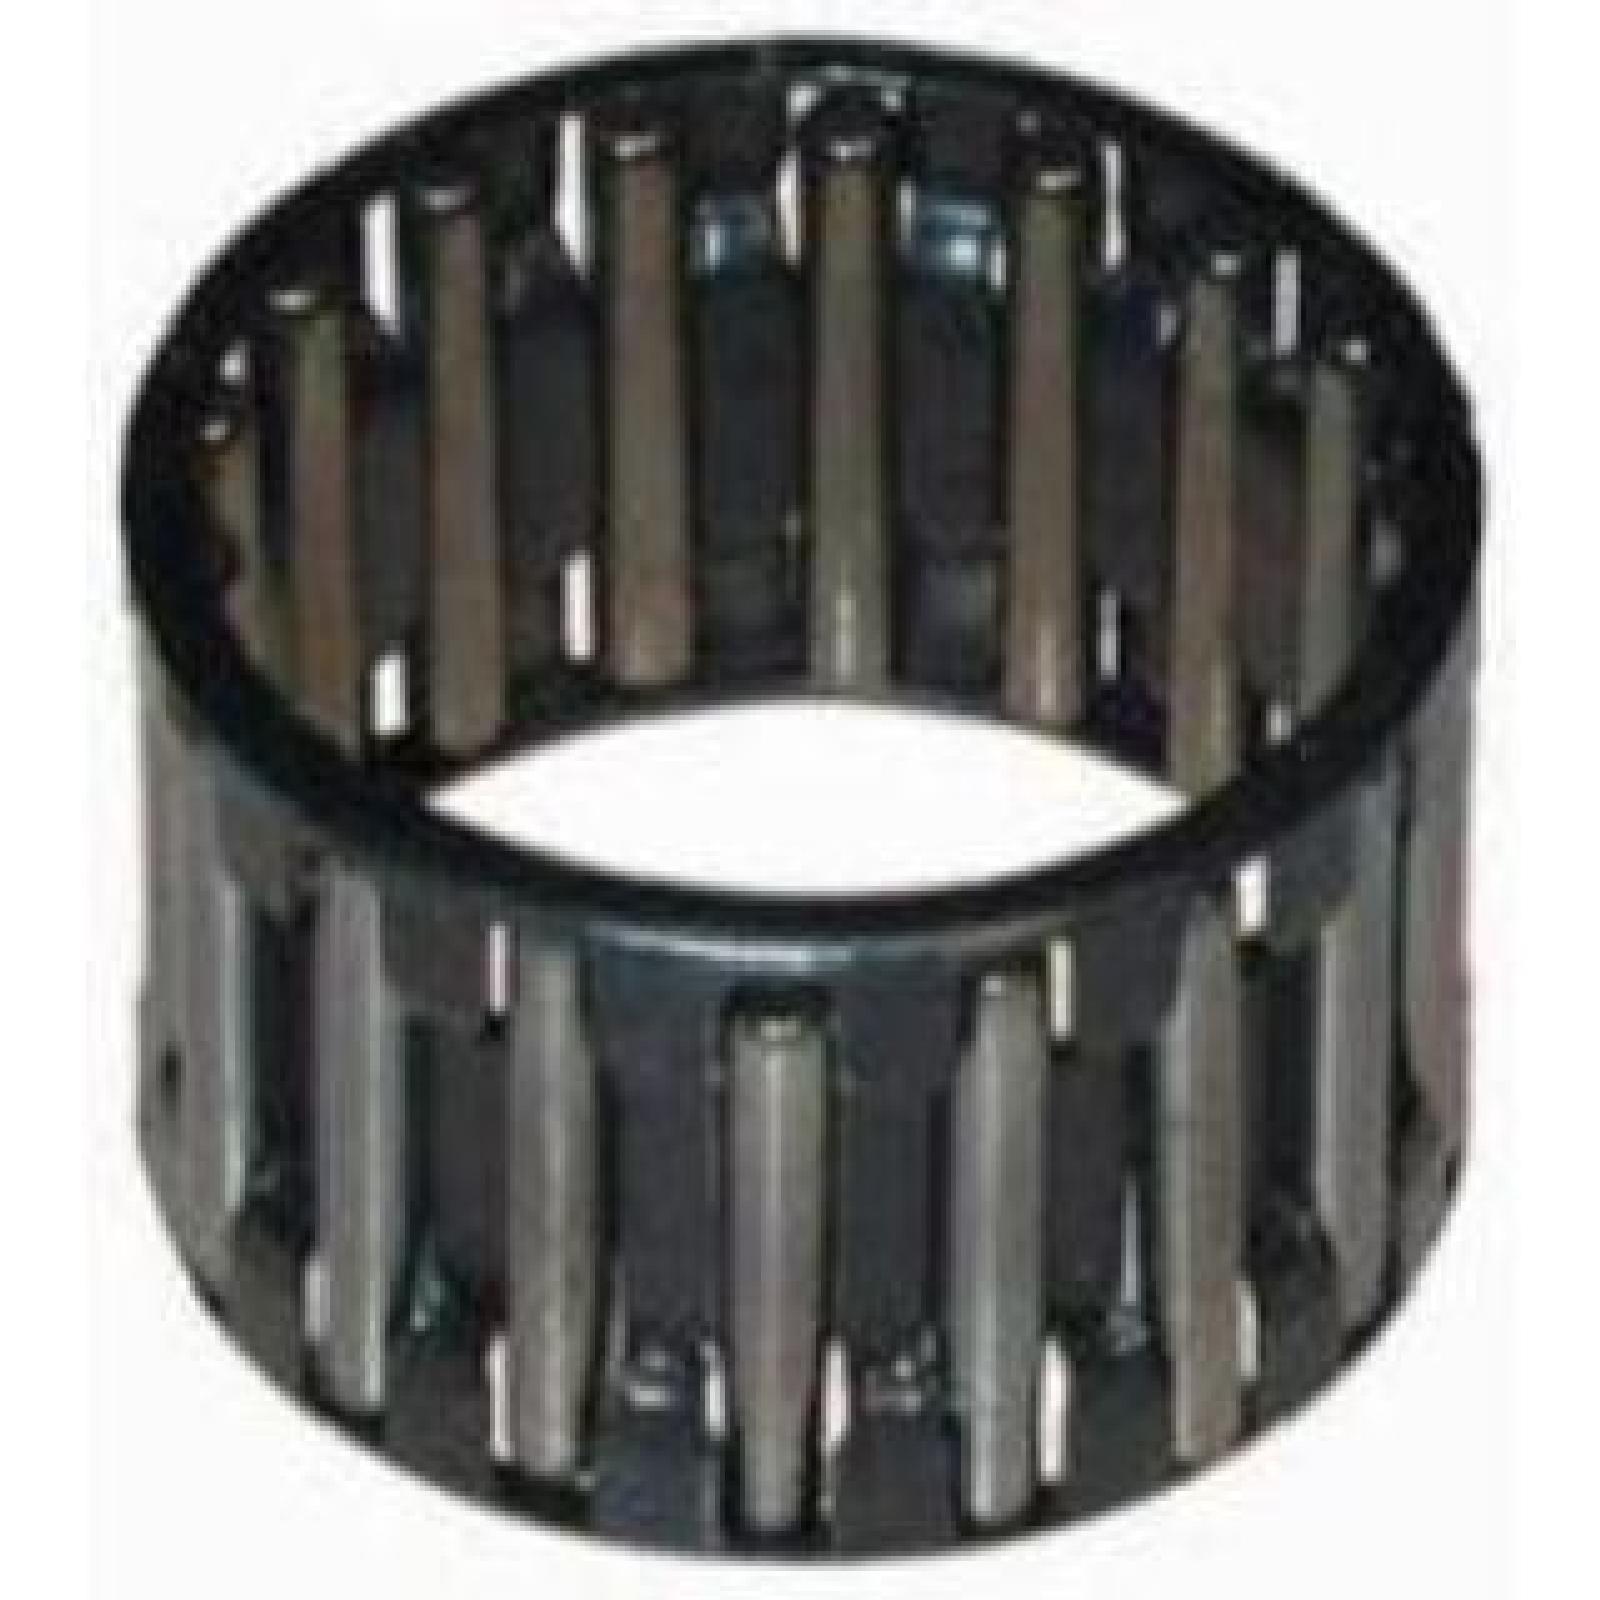 NEEDLE ROLLER BEARING 1.5 part# 11807 by Oregon